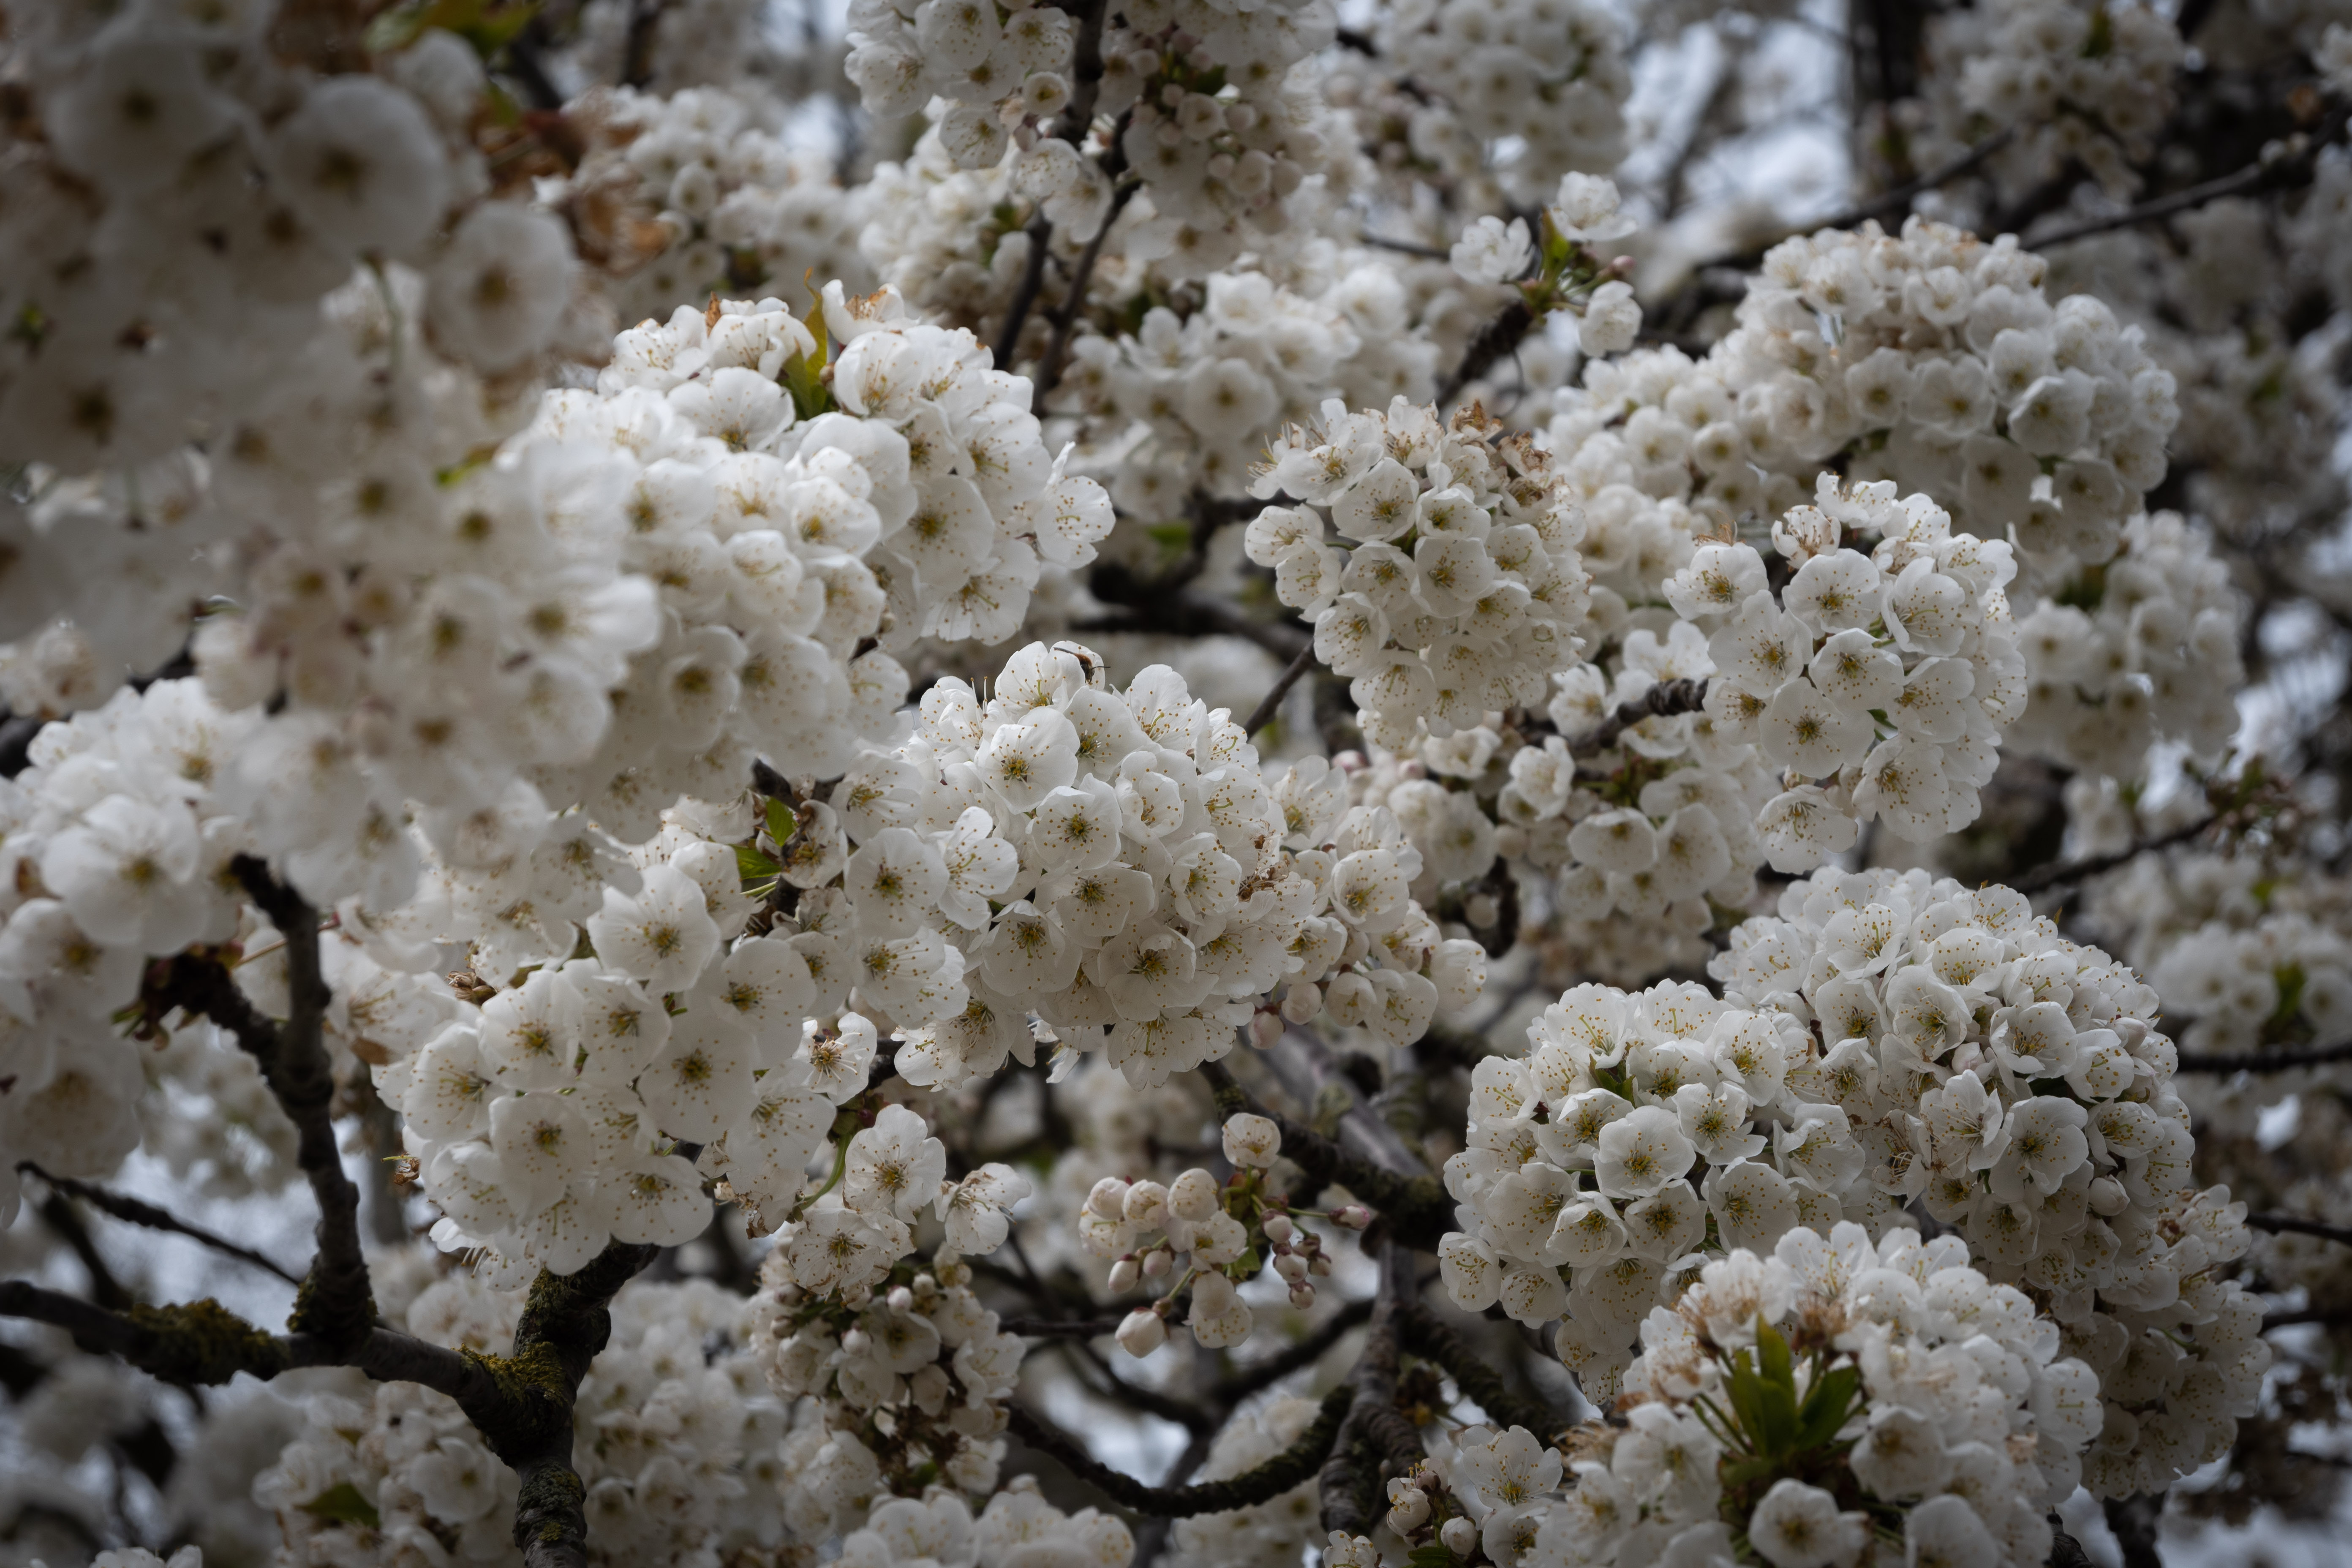 A landscape picture of clusters of white blossom against dark branches. The sky peaking through the gaps is also white. Some of the clusters of flowers are in focus others are blurred. The image somehow reminds me of jellyfish. 